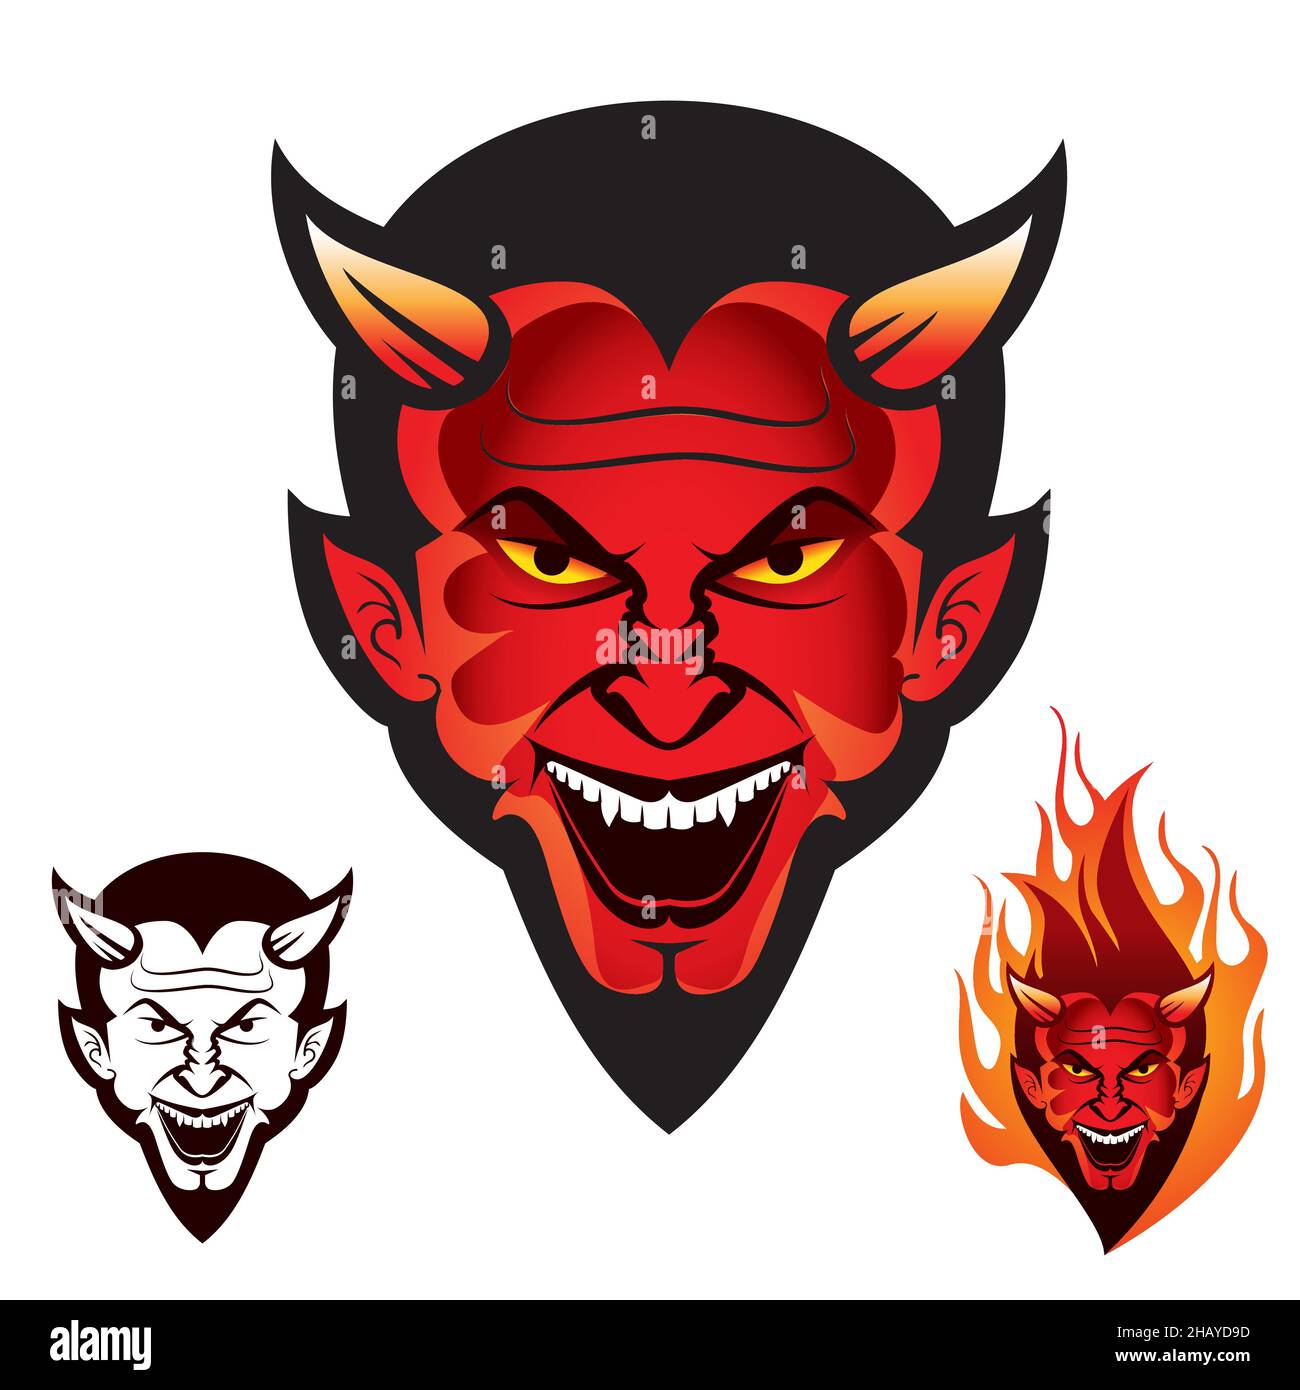 Diablo or Devil head logo, can be used for tshirt, bike club or any other purpose. Stock Vector